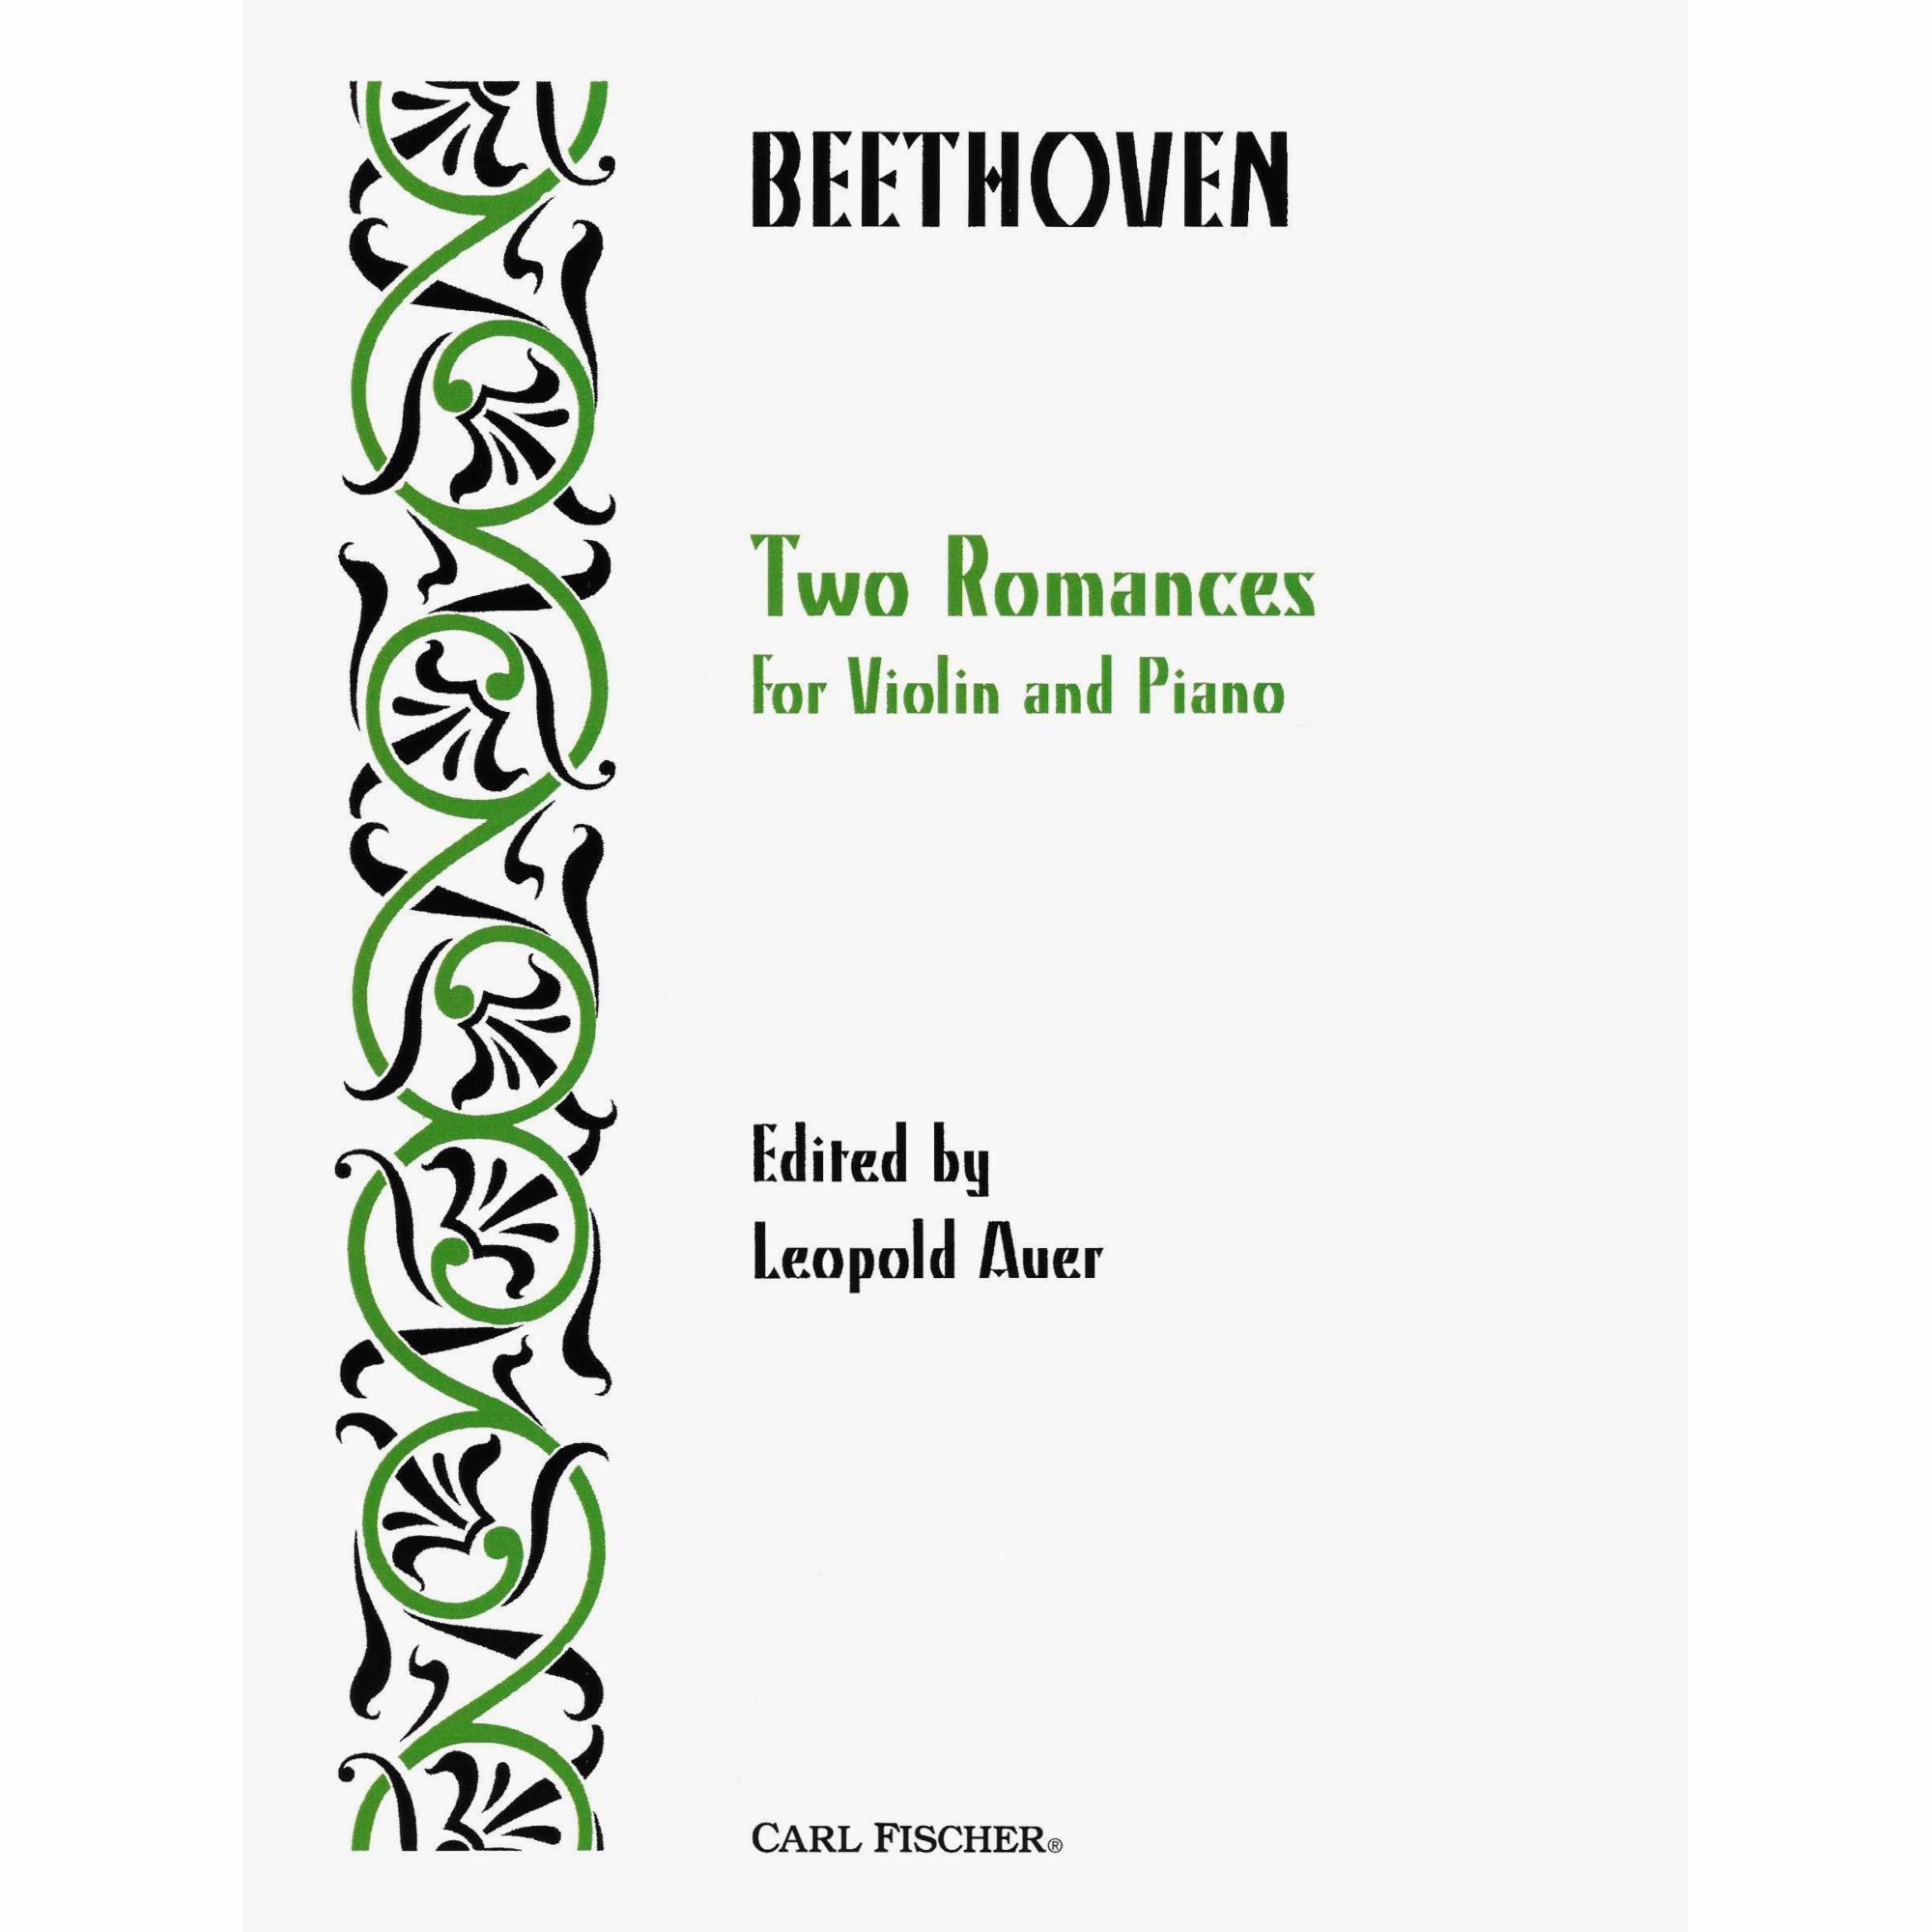 Beethoven -- Two Romances for Violin and Piano